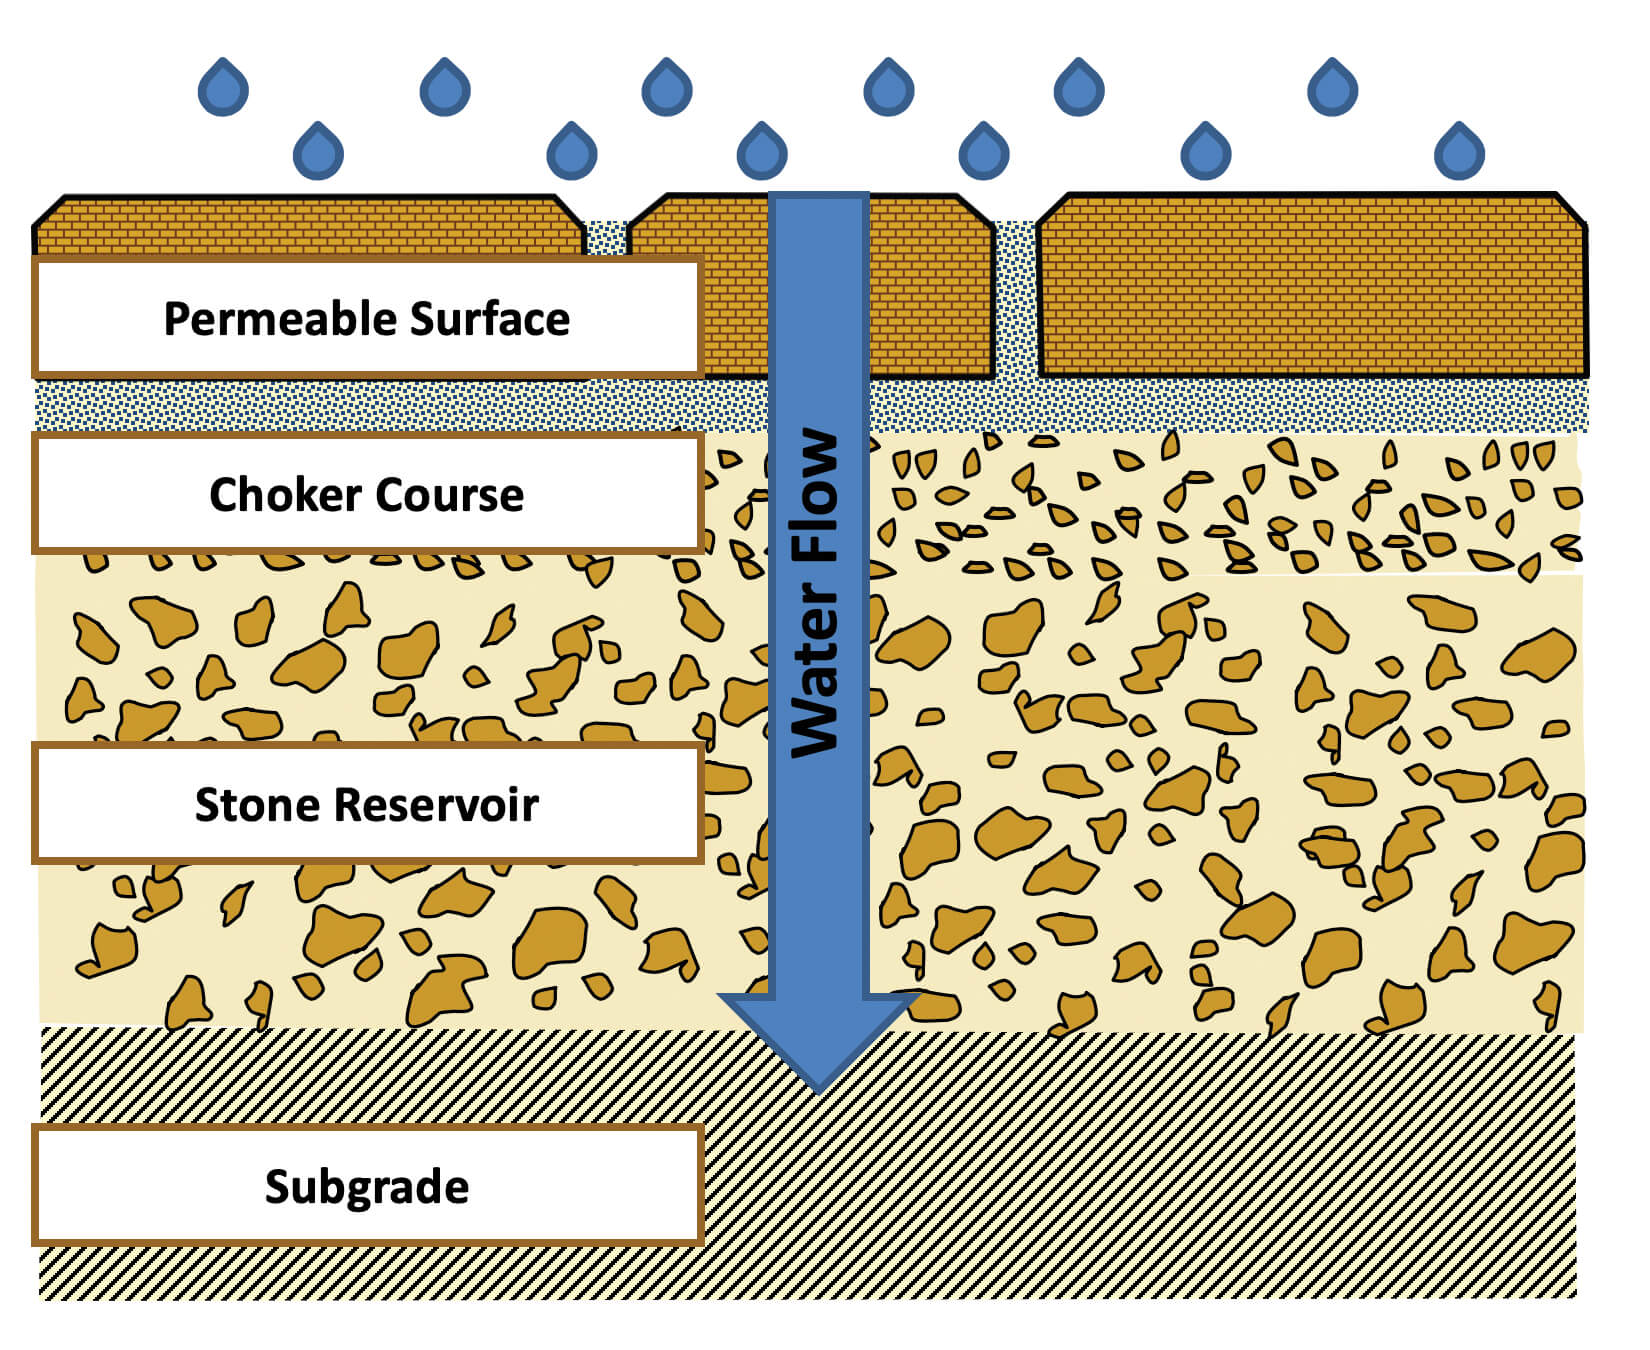 Full infiltration permeable system